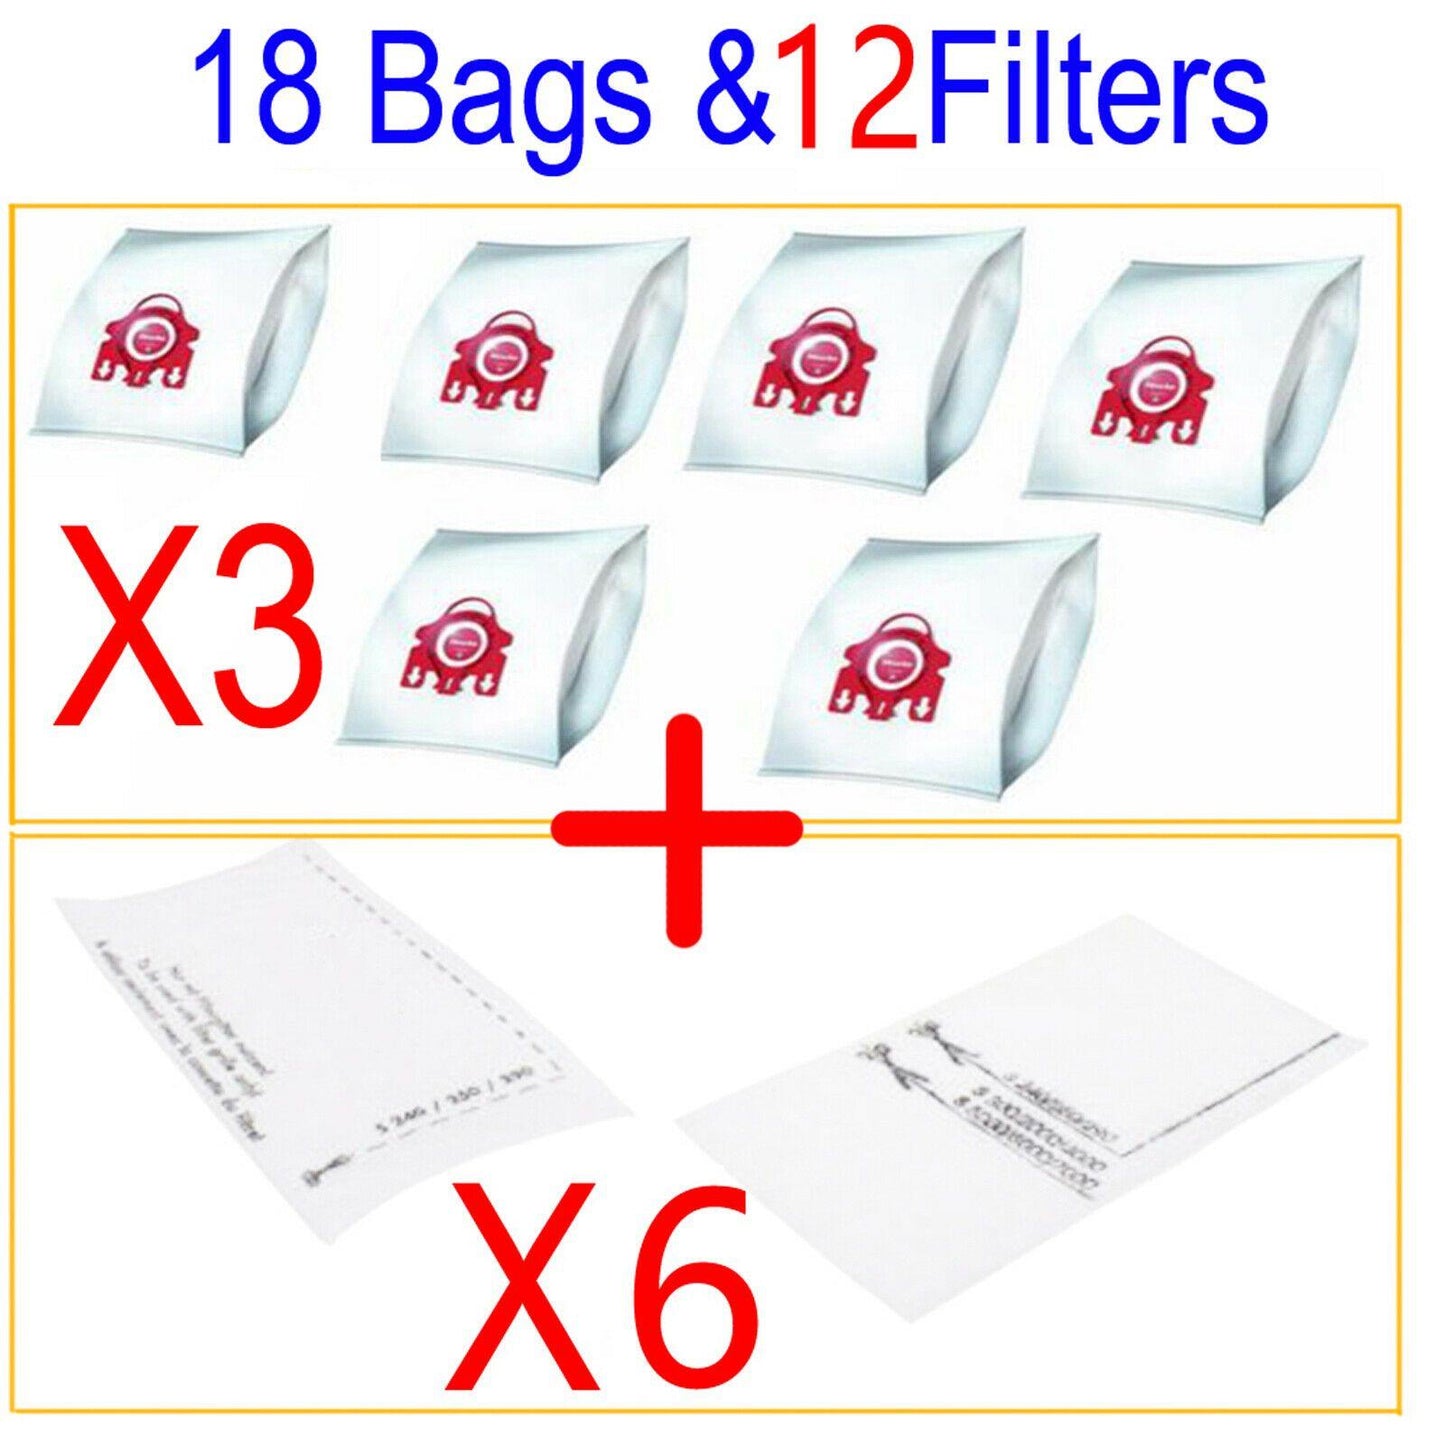 18 Vacuum Dust Bags & 12 Filters For Miele S251i-1 S255 S255i S256 S291 S291-2 Sparesbarn